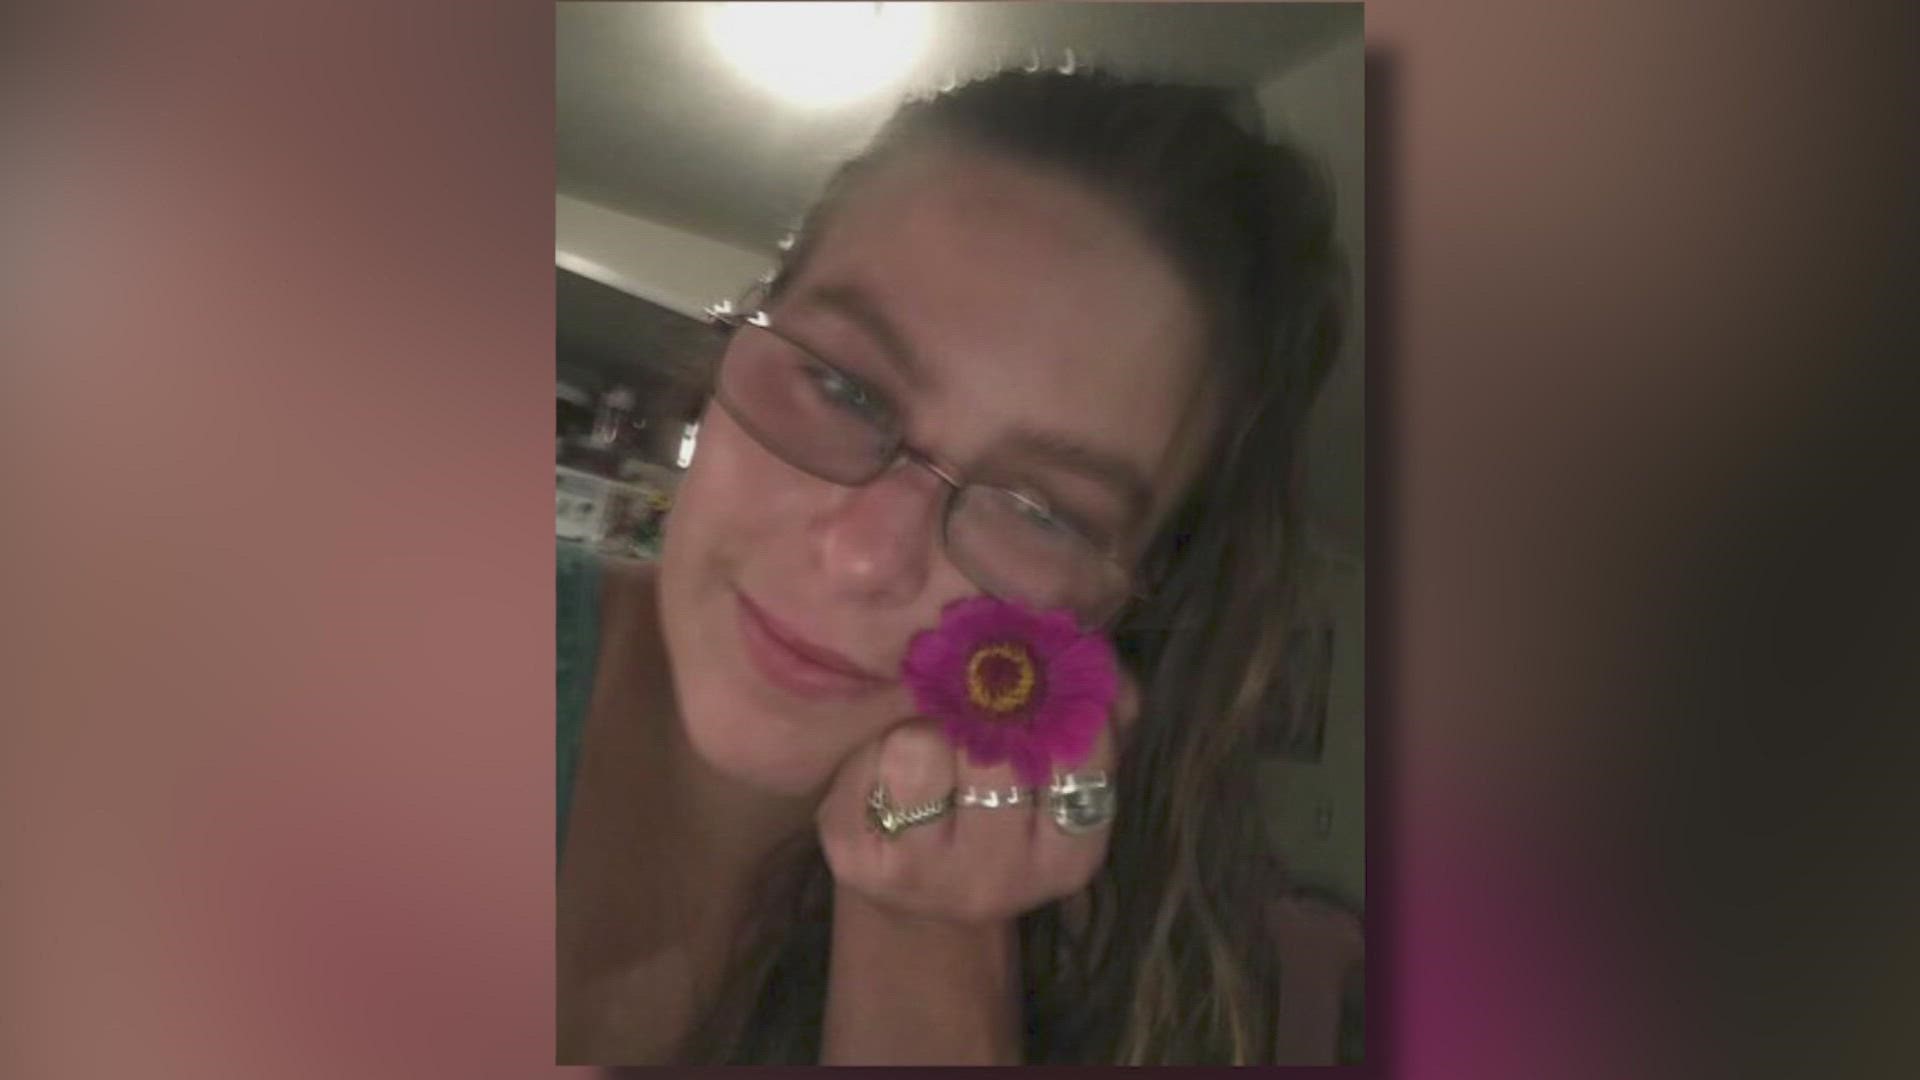 The family of 33-year-old Brittany McMahon of Bandera County isn't convinced she took her own life. McMahon is one of a handful who've disappeared since April.